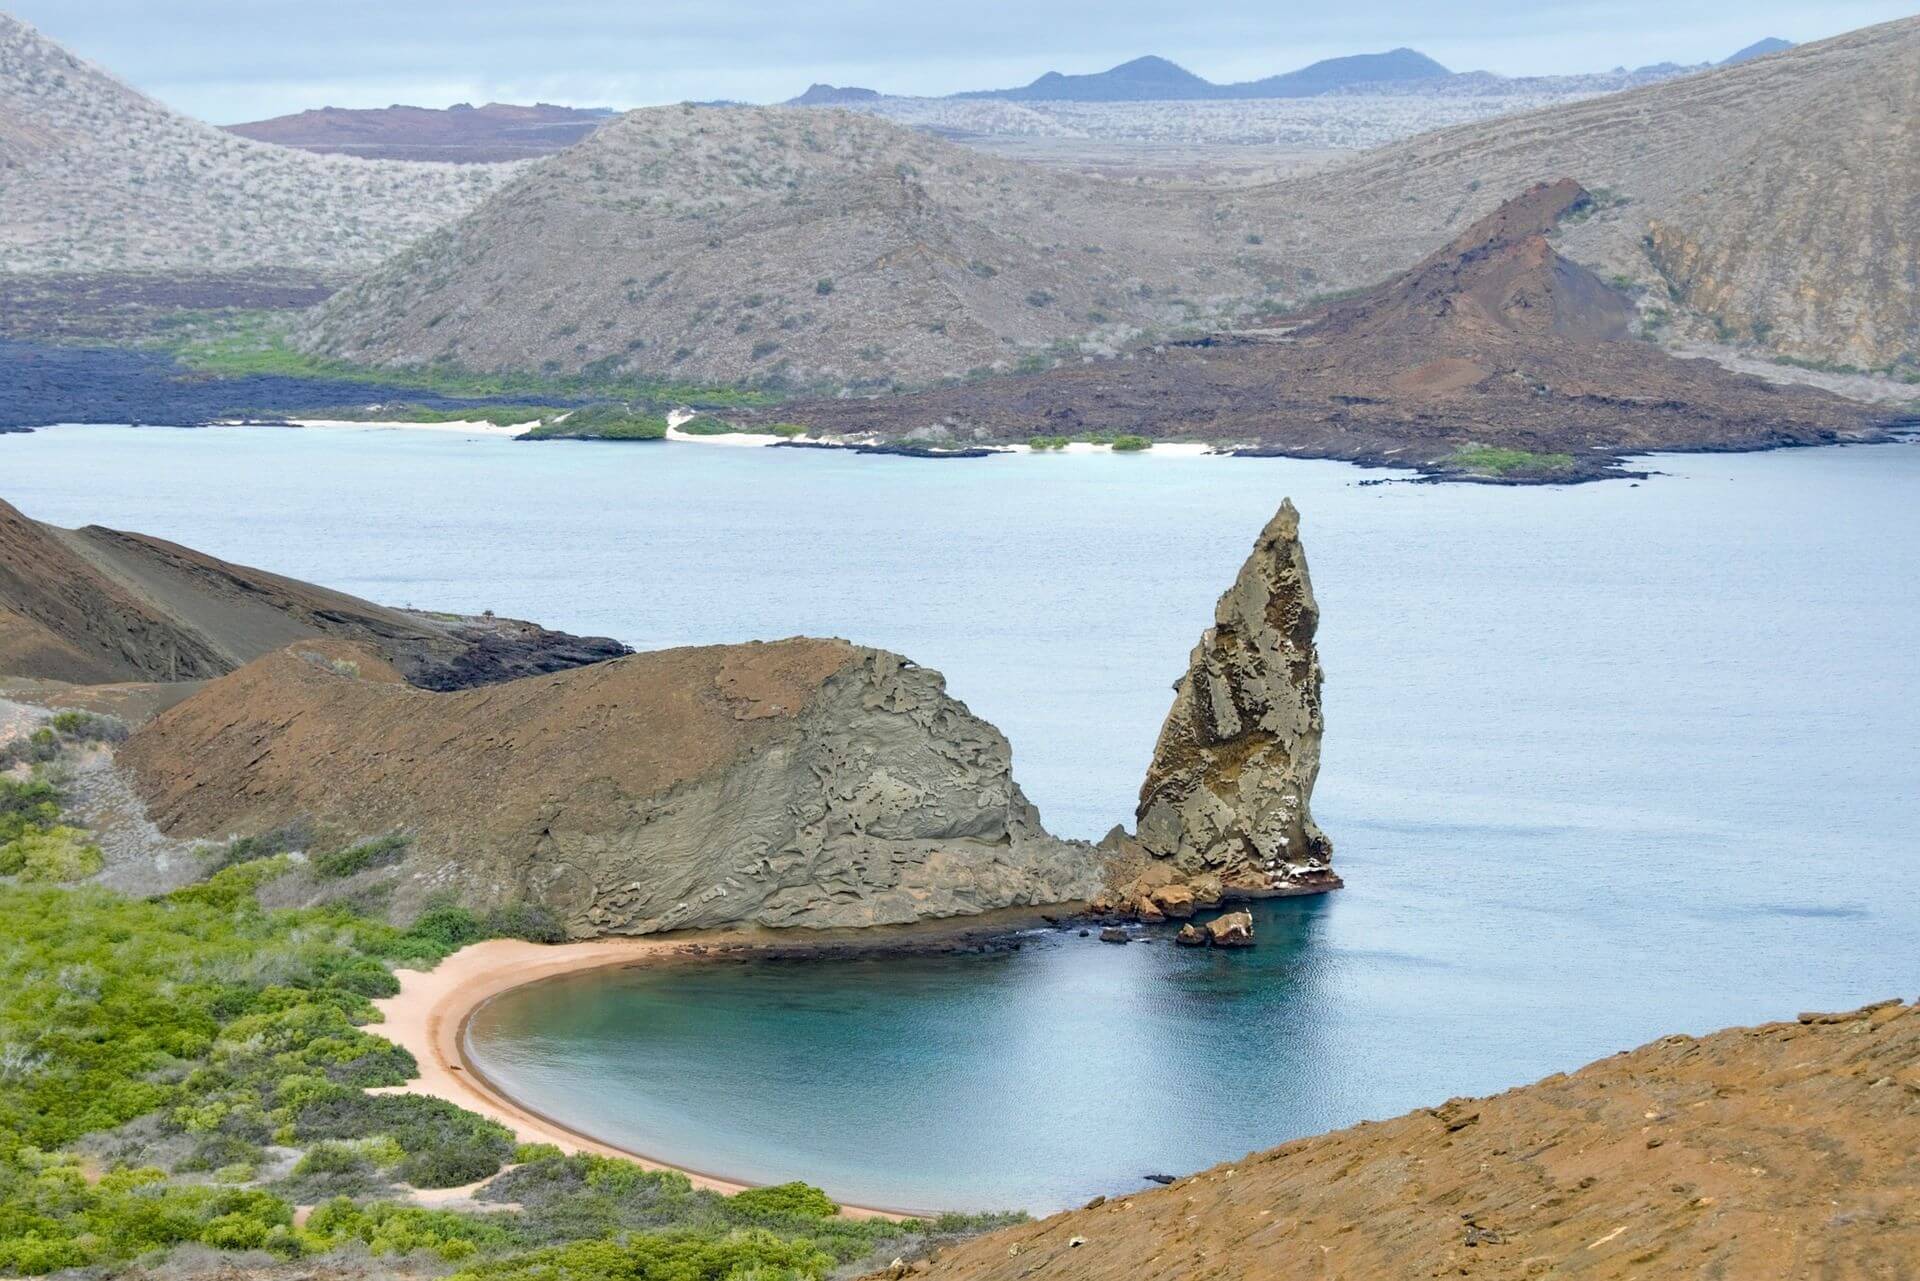 Mountains and rock formations line the coast of the Galápagos Islands